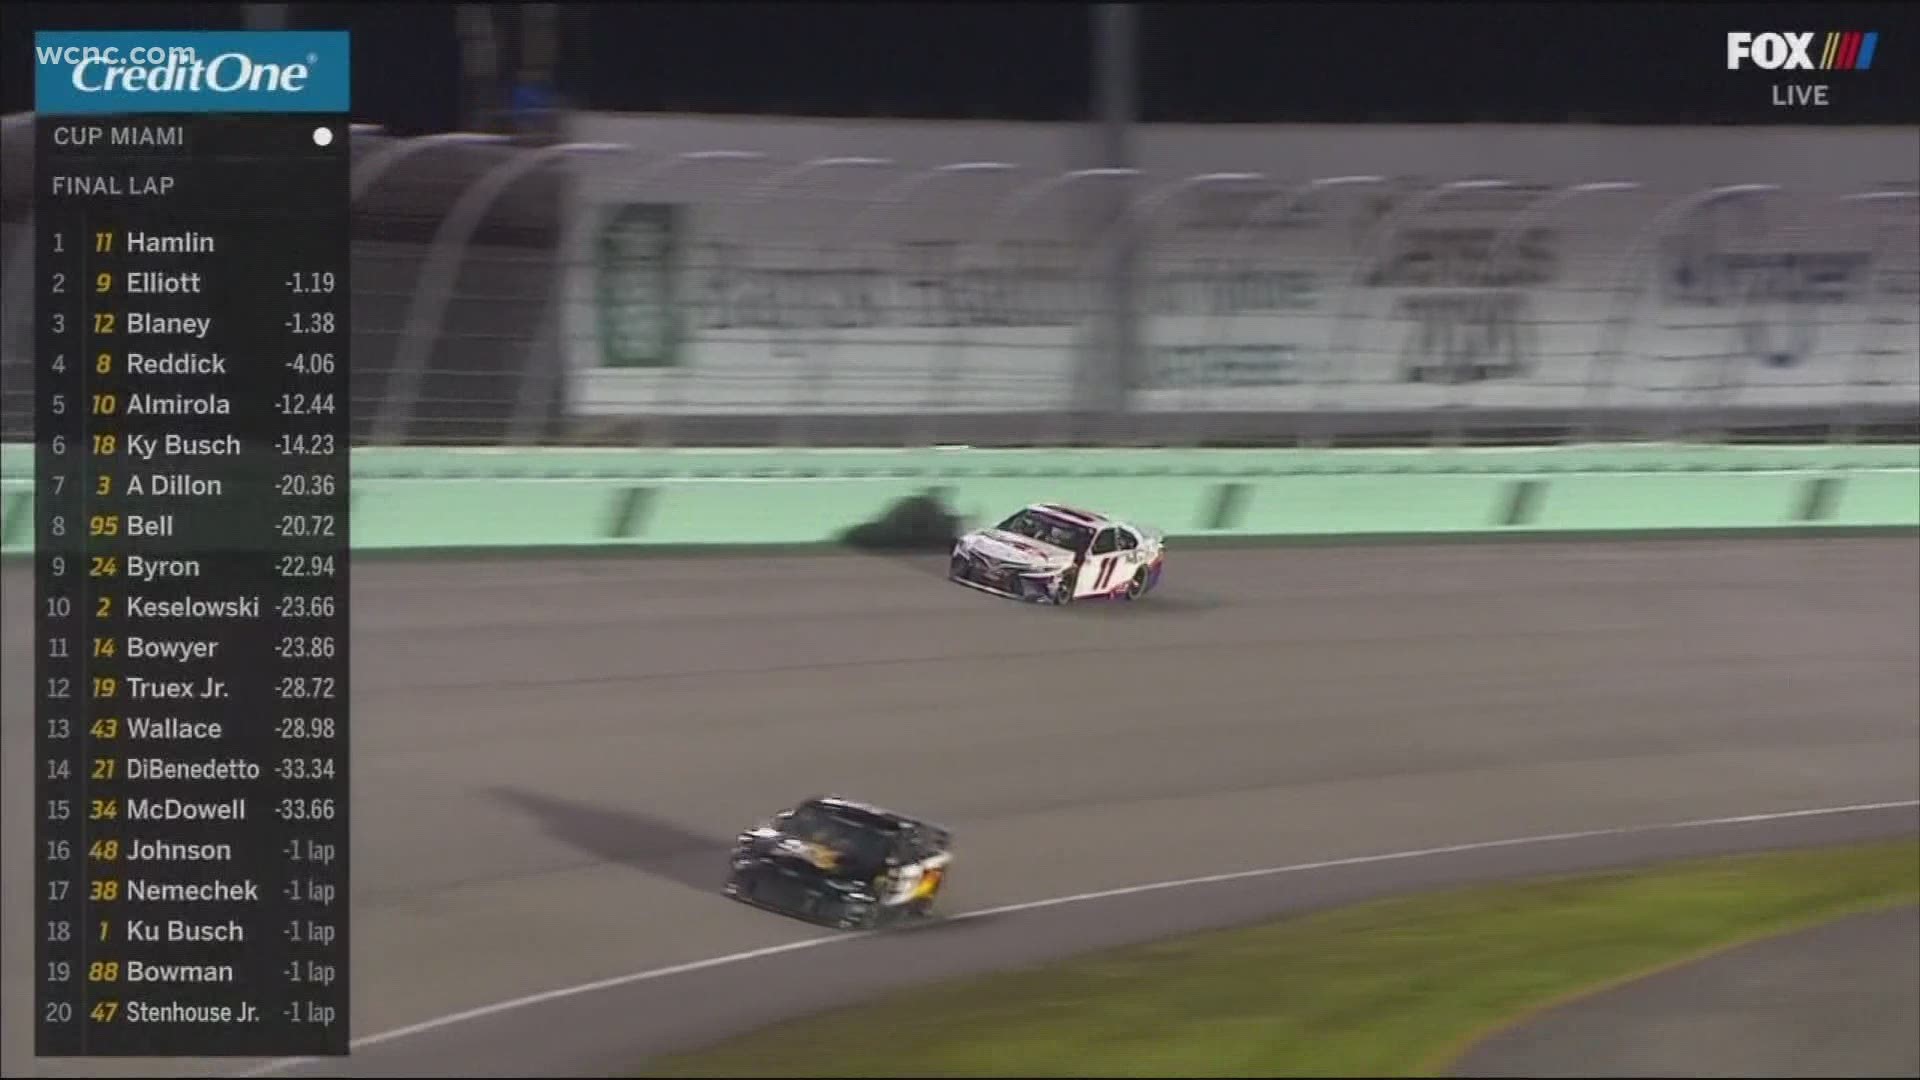 Highlights from NASCAR at Homestead-Miami over the weekend wcnc